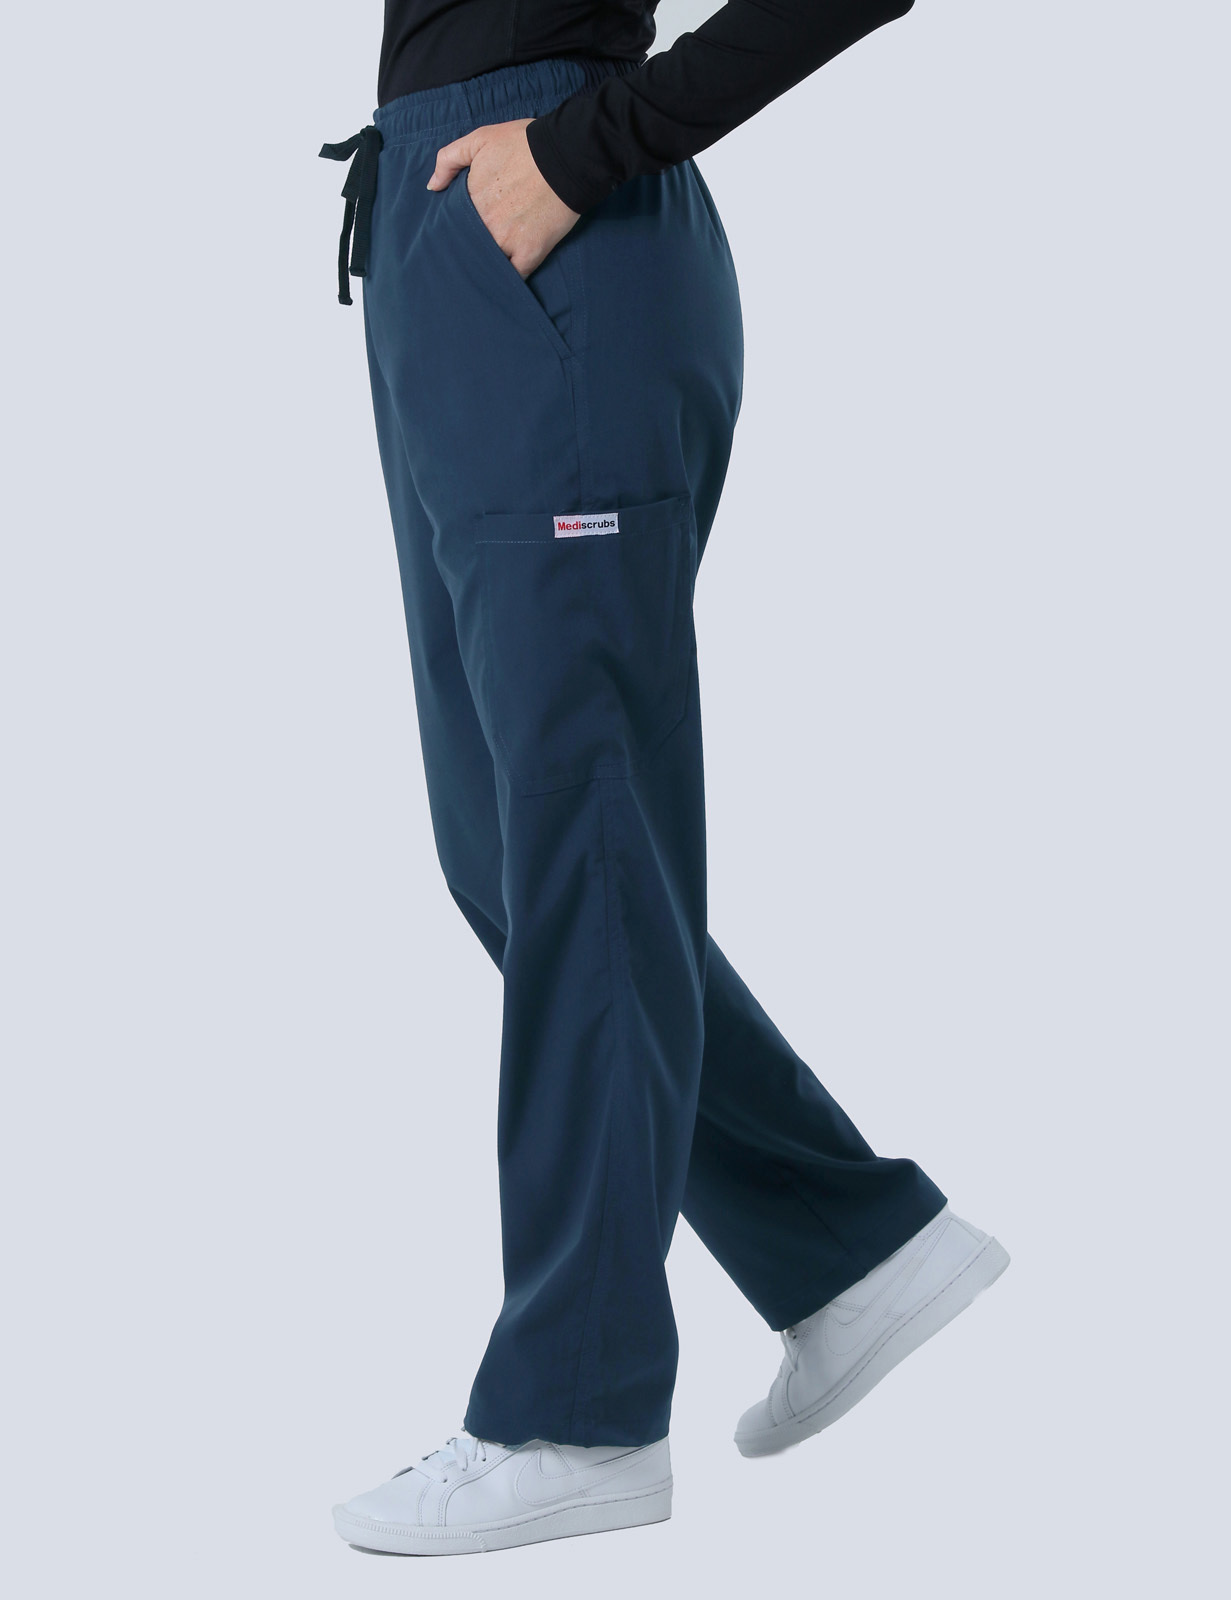 Melbourne Hospital - RN (4 Pocket Scrub Top and Cargo Pants in Navy incl Logos)